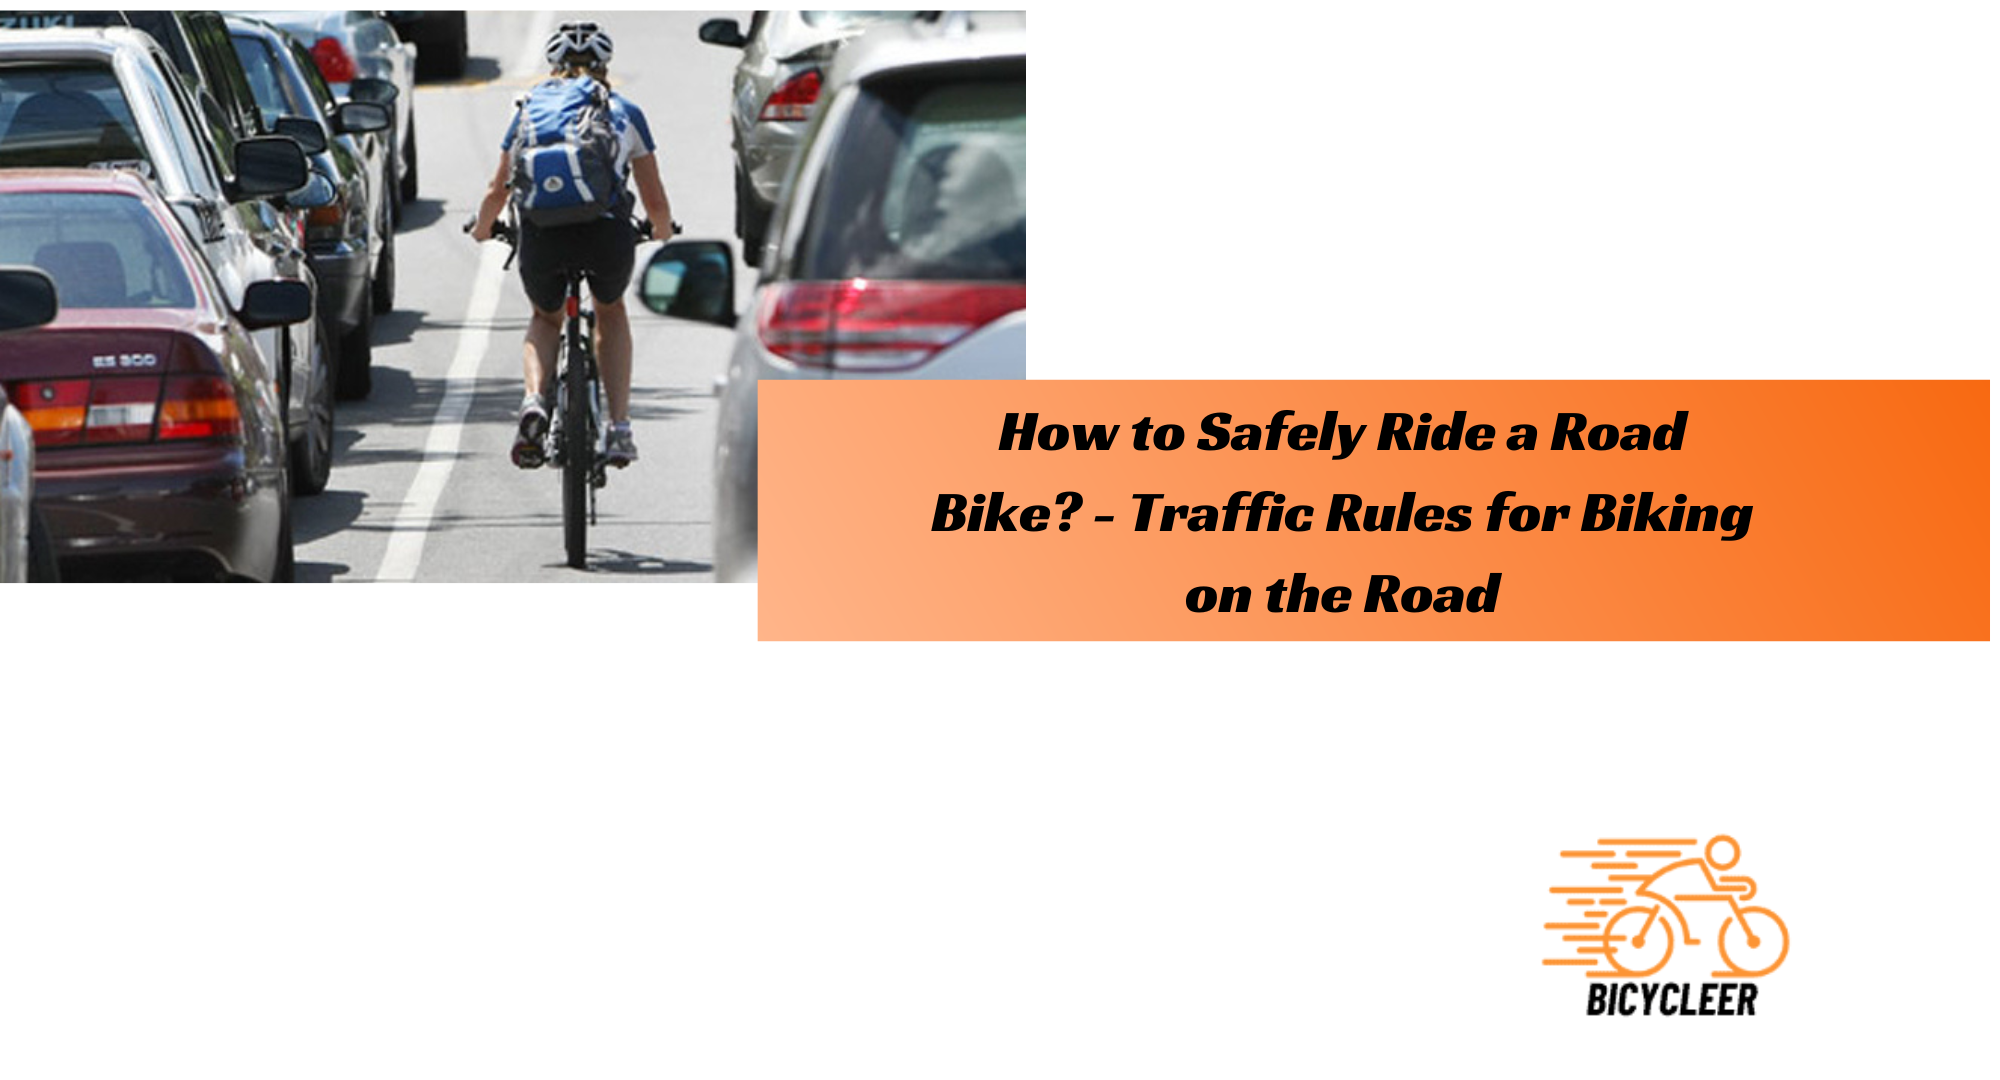 How to Safely Ride a Road Bike? - Traffic Rules for Biking on the Road